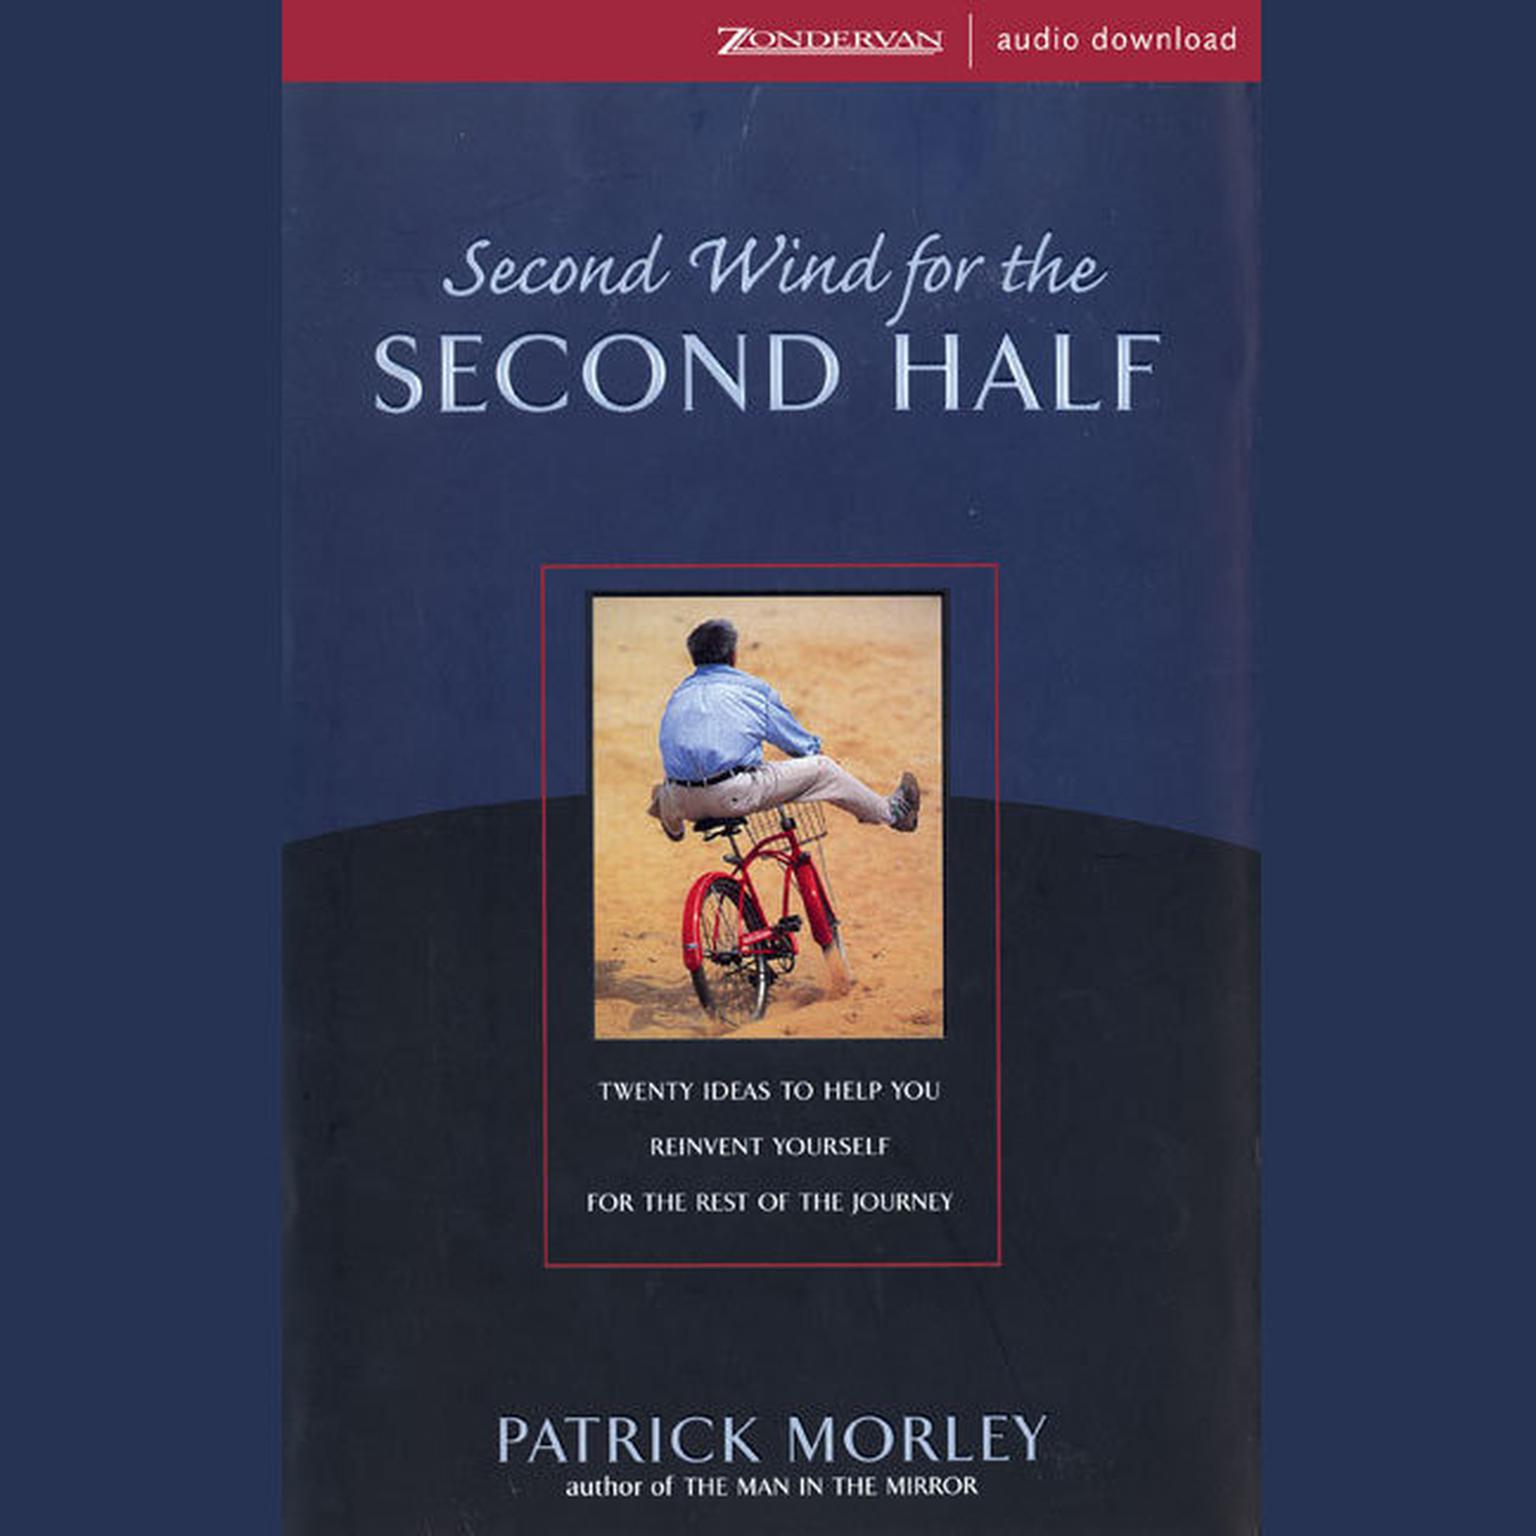 Second Wind for the Second Half (Abridged): Twenty Ideas to Help You Reinvent Yourself for the Rest of the Journey Audiobook, by Patrick Morley